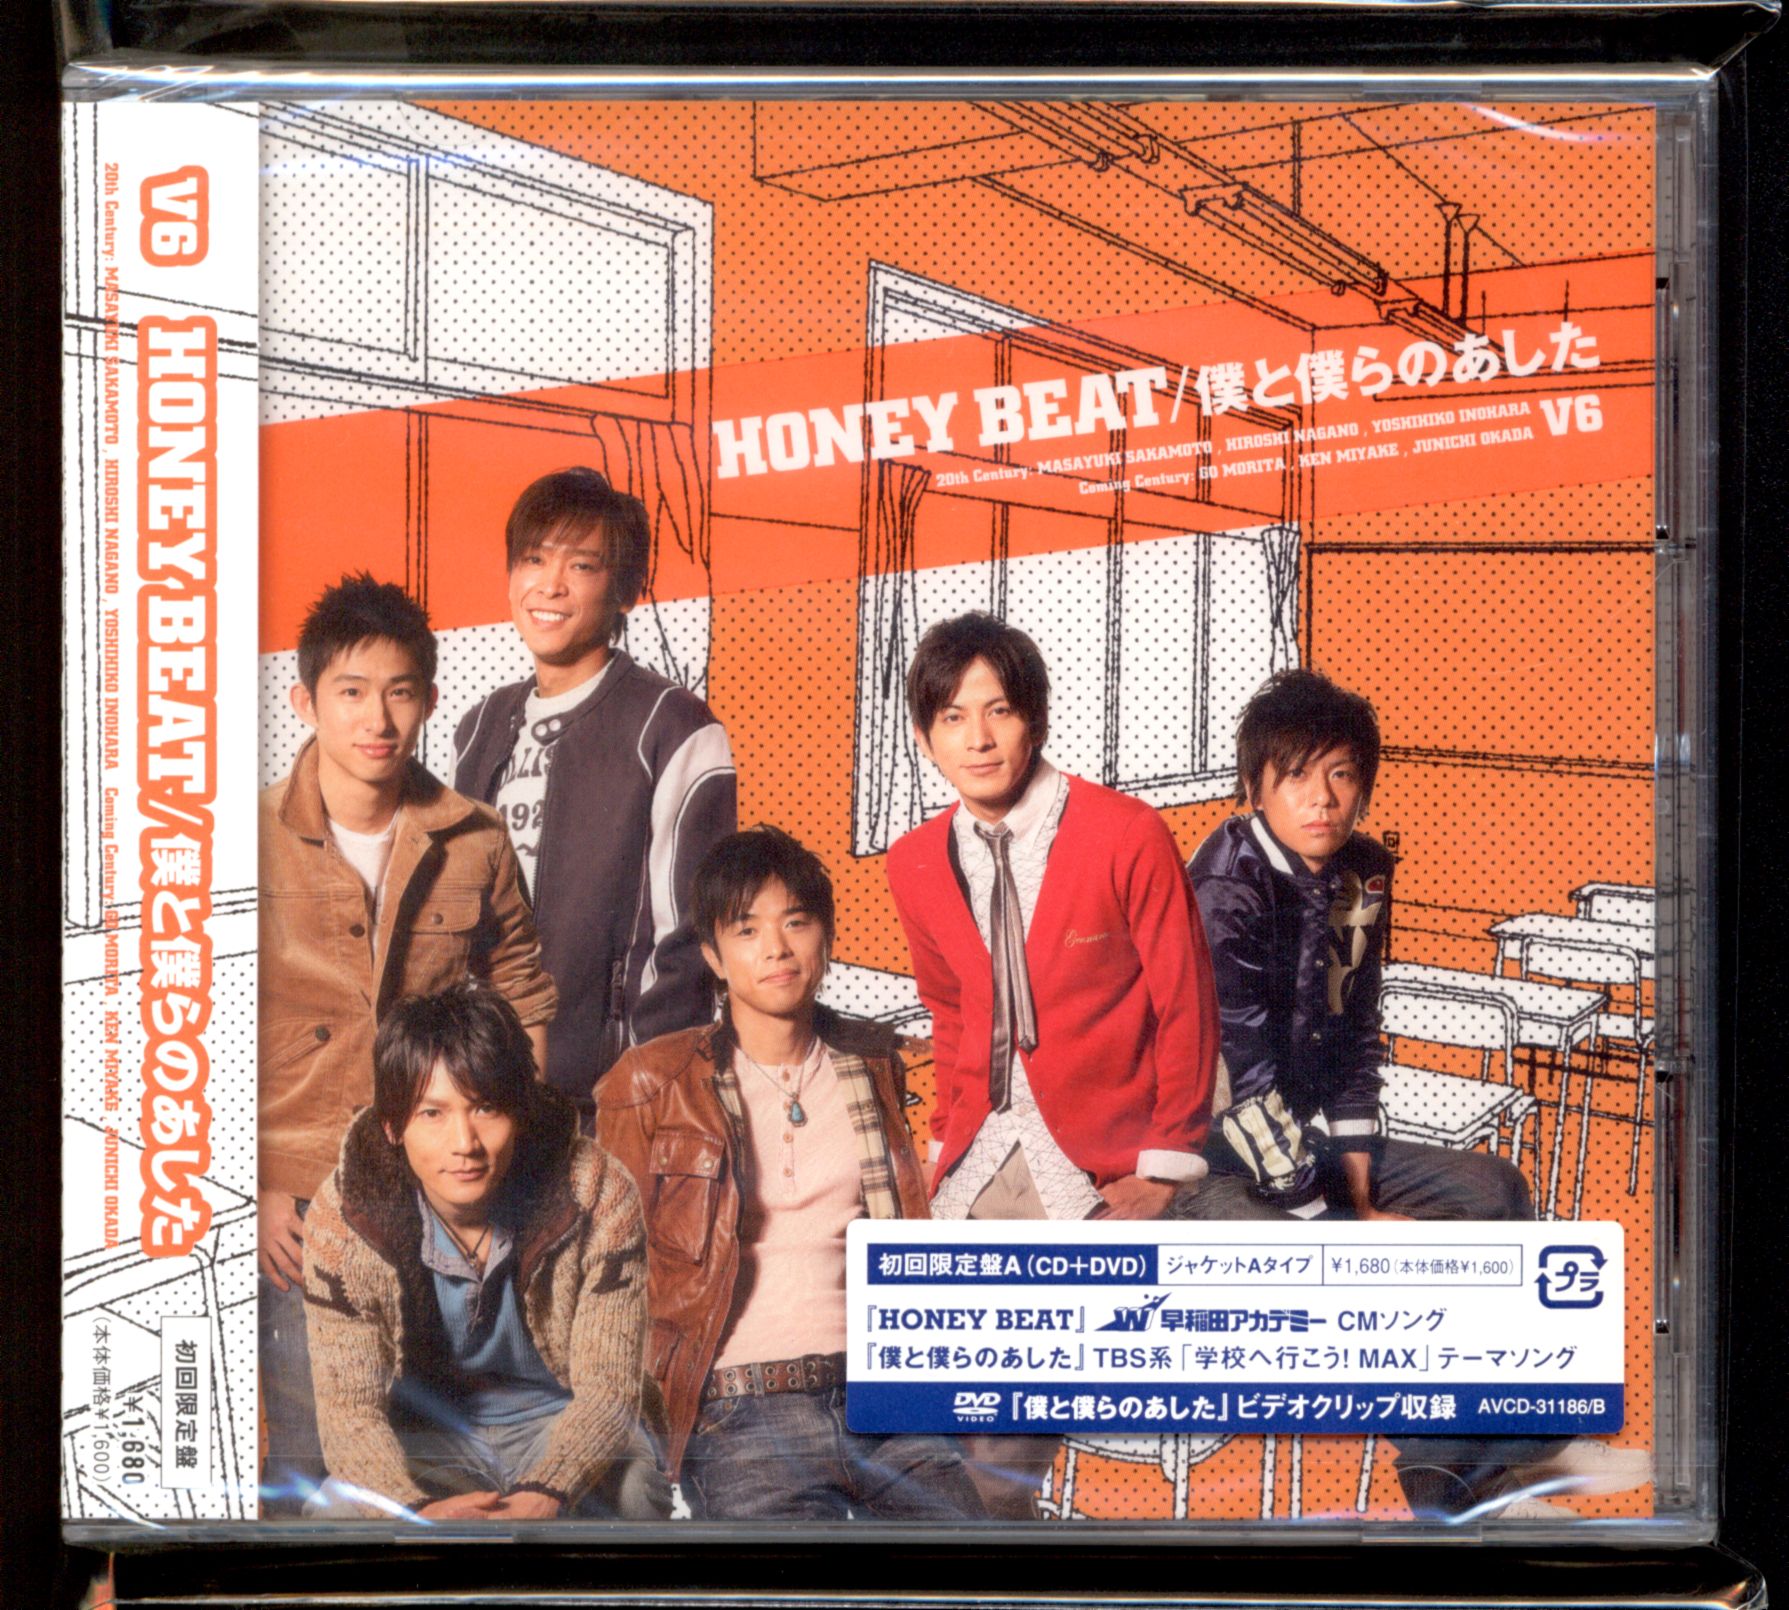 V6 HONEY BEAT / I and tomorrow we First edition Limited Edition A